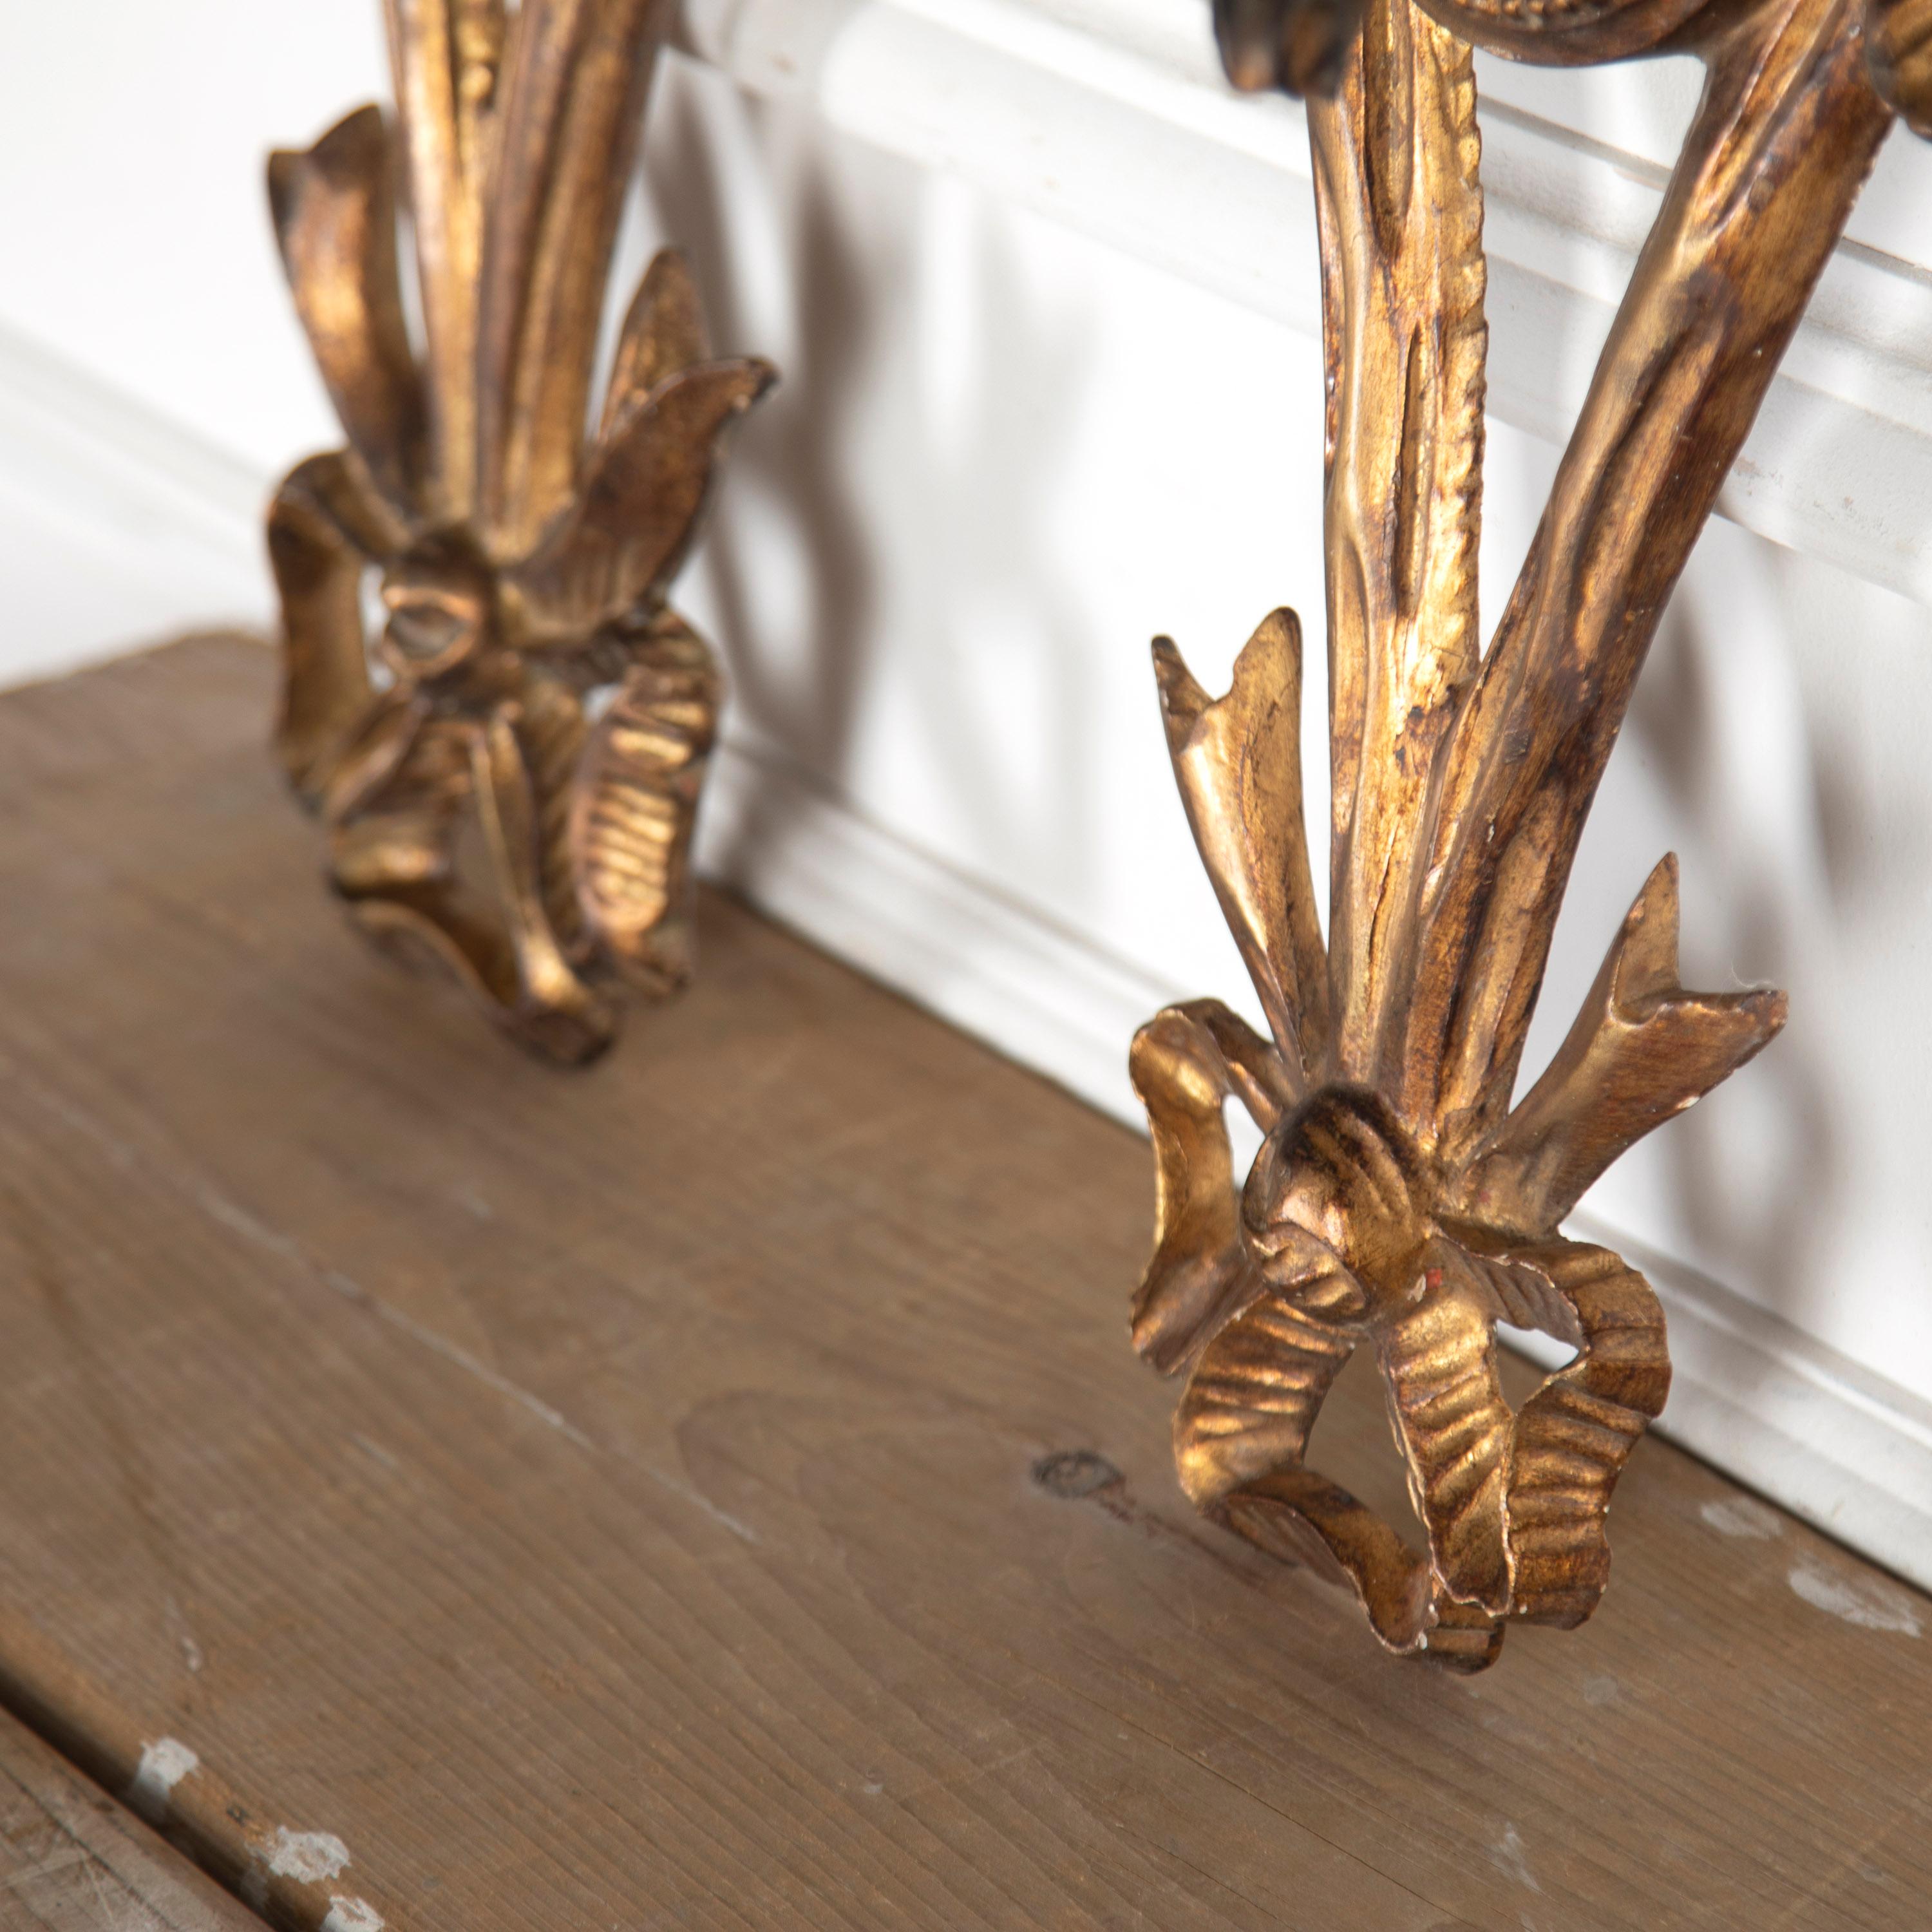 Very decorative pair of French 19th Century wall sconces.

Each offering two candleholders, these wooden sconces are beautifully water gilded with a wonderful burnished patina.

With extensive decorative details, including ribbon-tied bows to